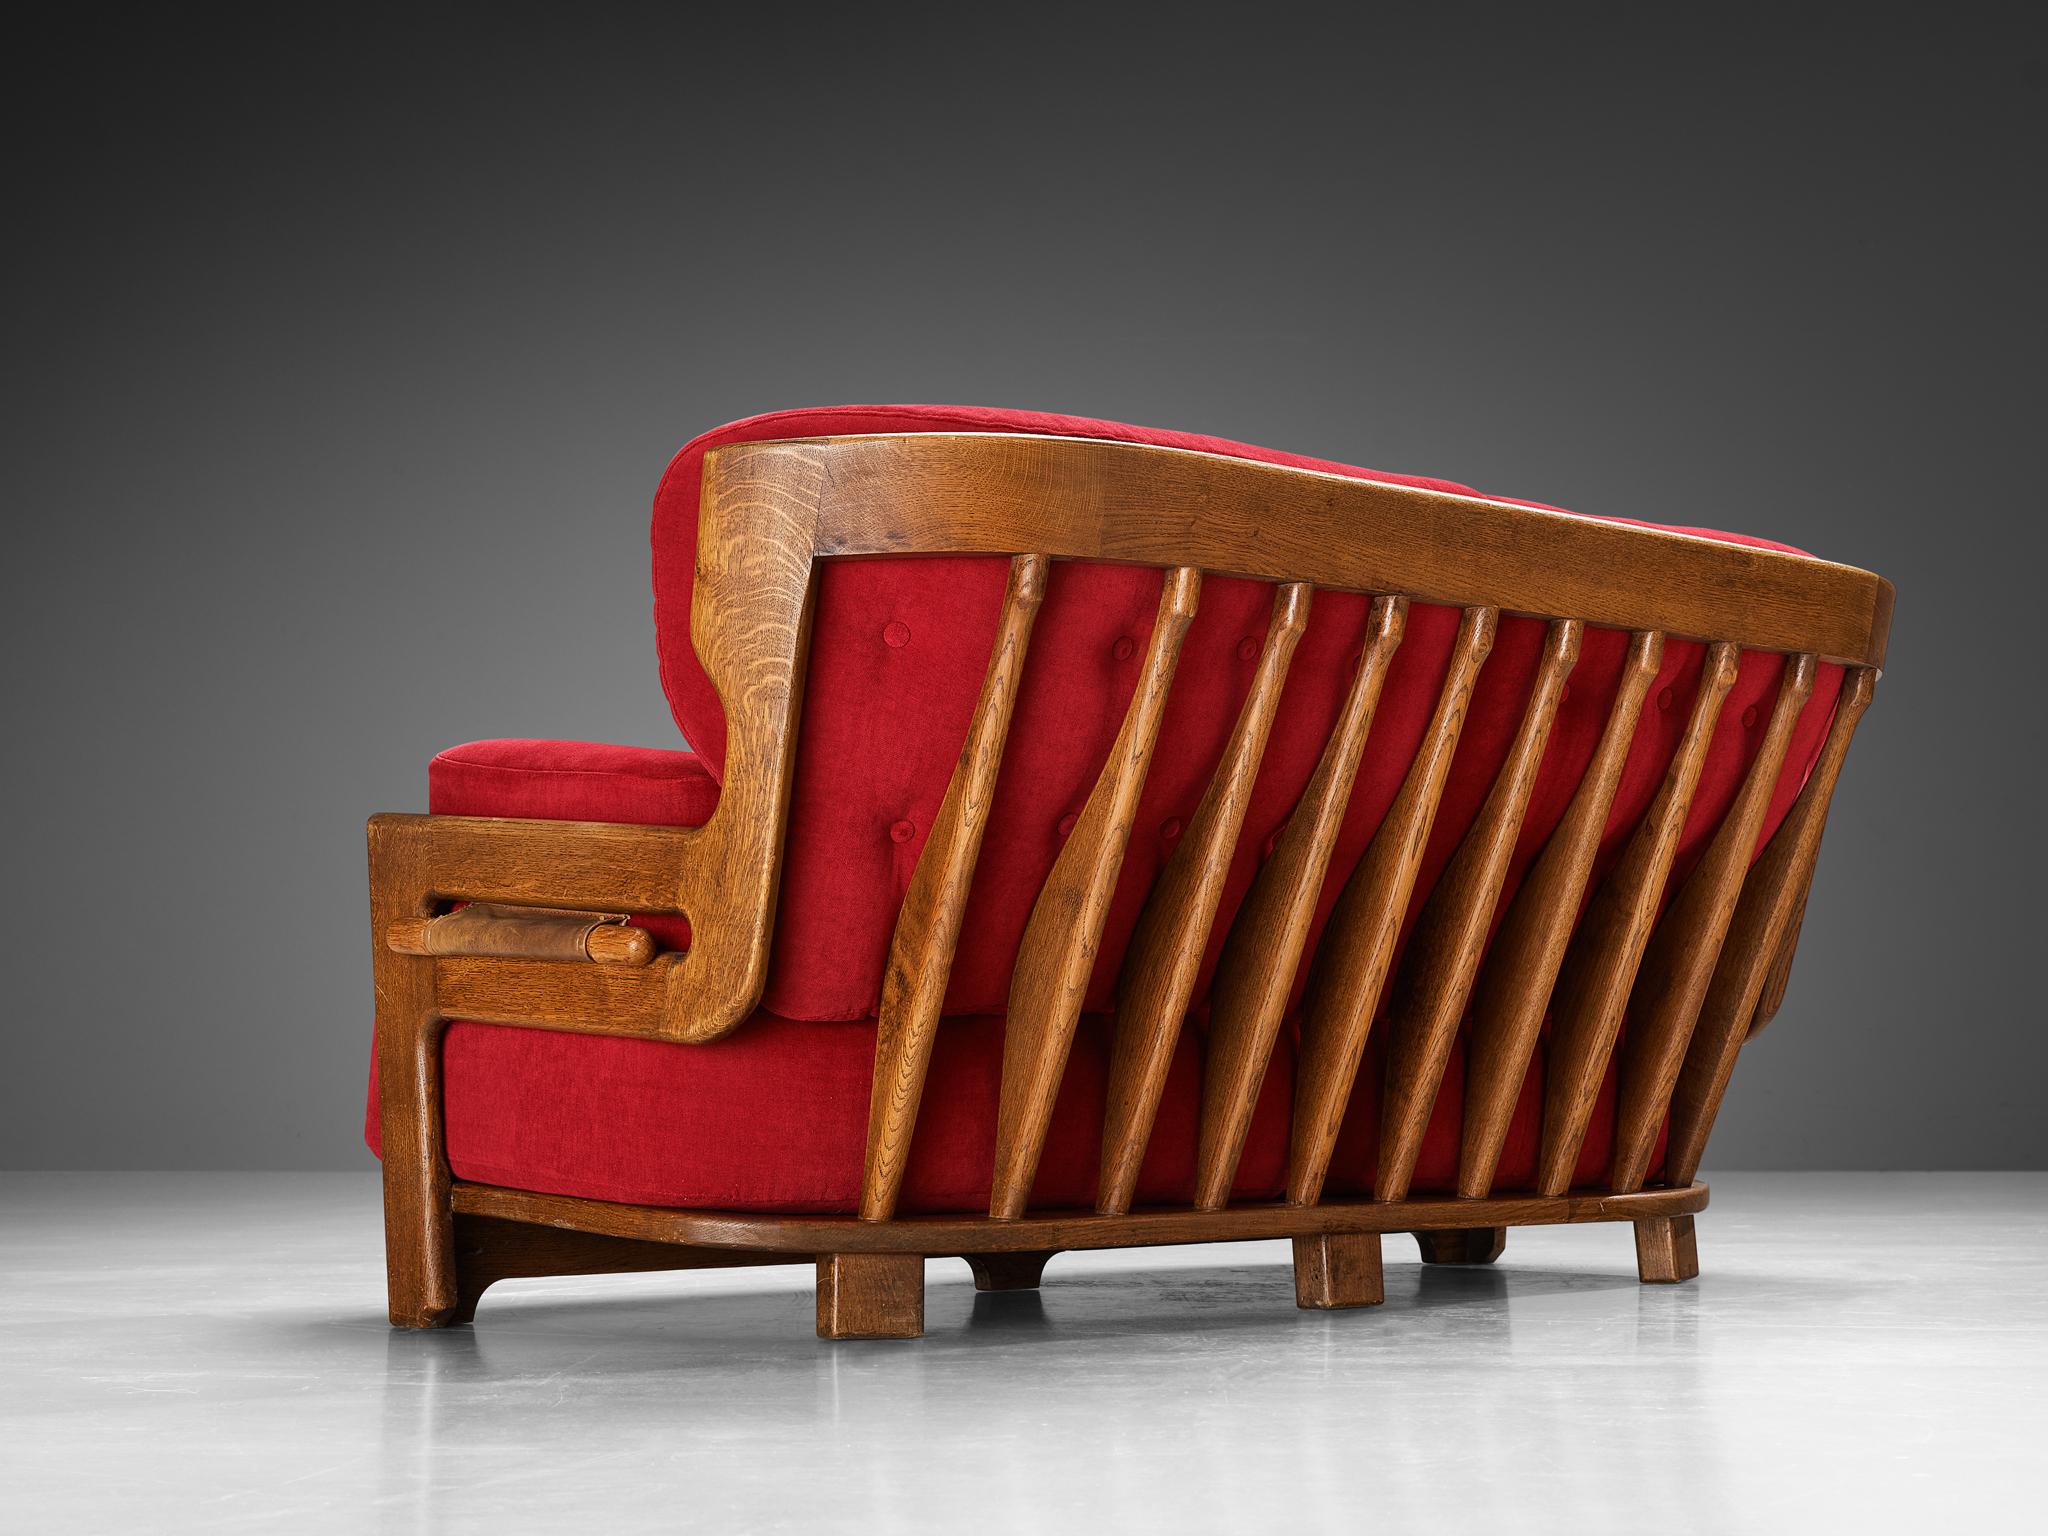 Guillerme et Chambron for Votre Maison, sofa model 'Denis', velvet, oak, France, 1960s

Extraordinary Guillerme and Chambron sofa in solid oak with the typical characteristic decorative details at the back and capricious forms of the legs. This